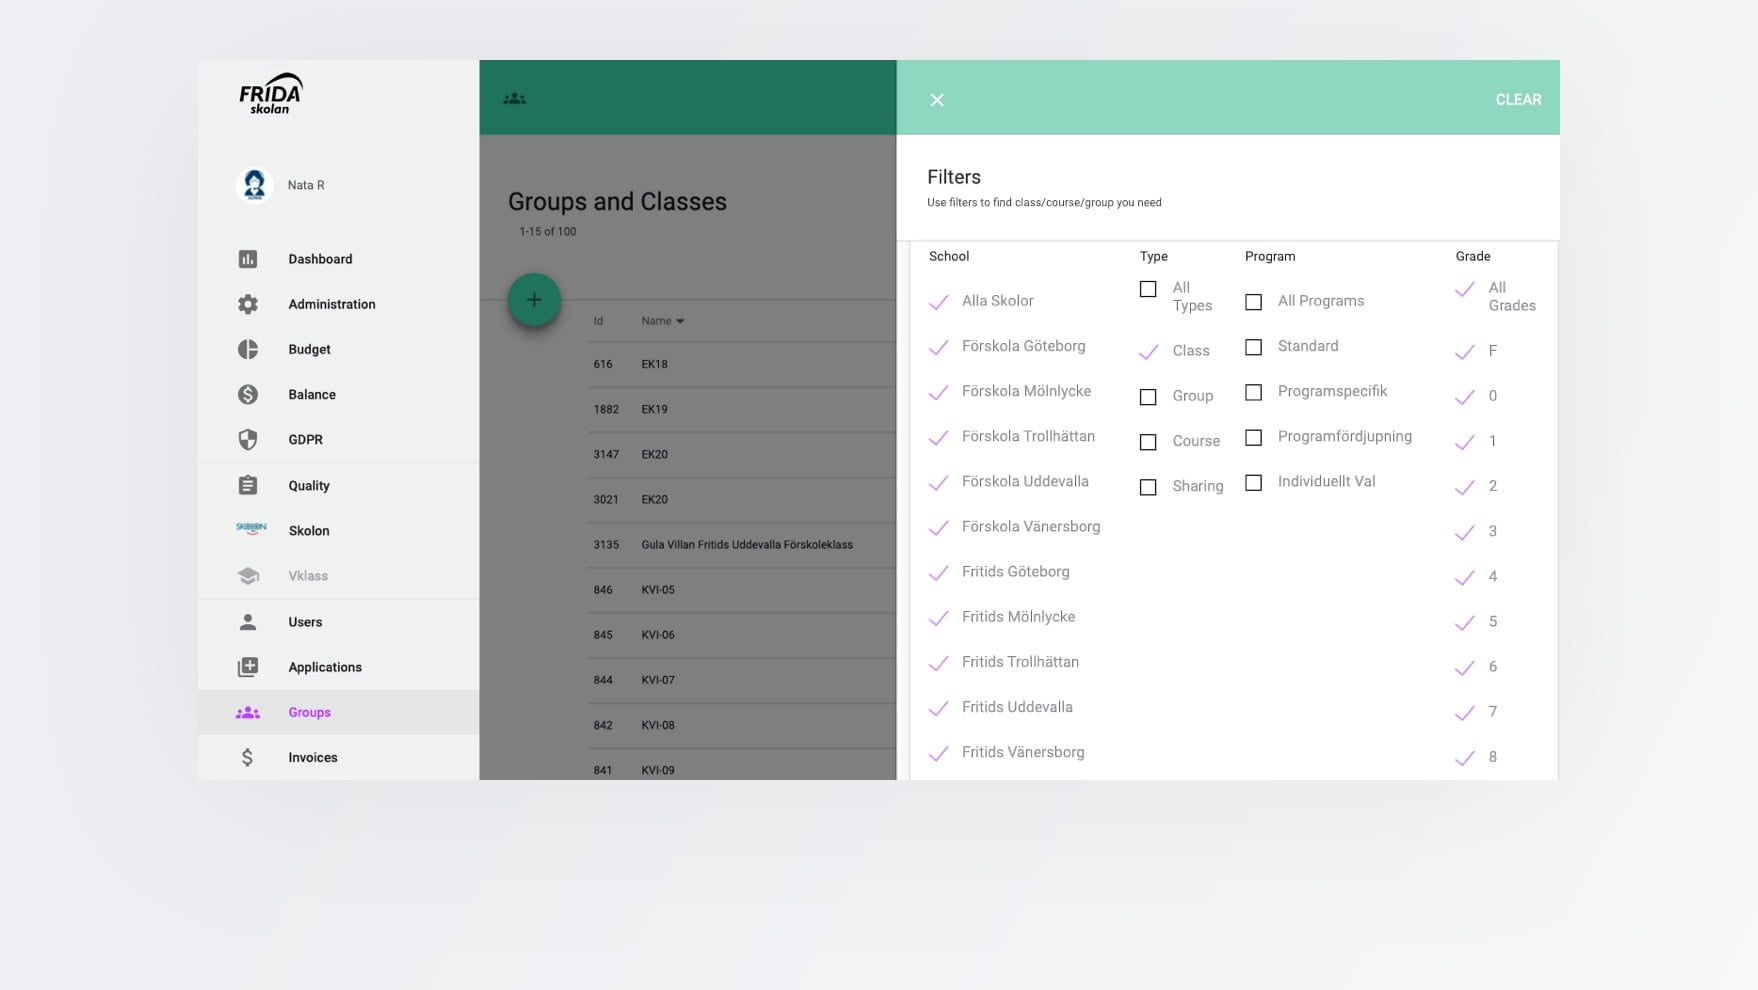 Screenshot of the school administration system’s filters menu